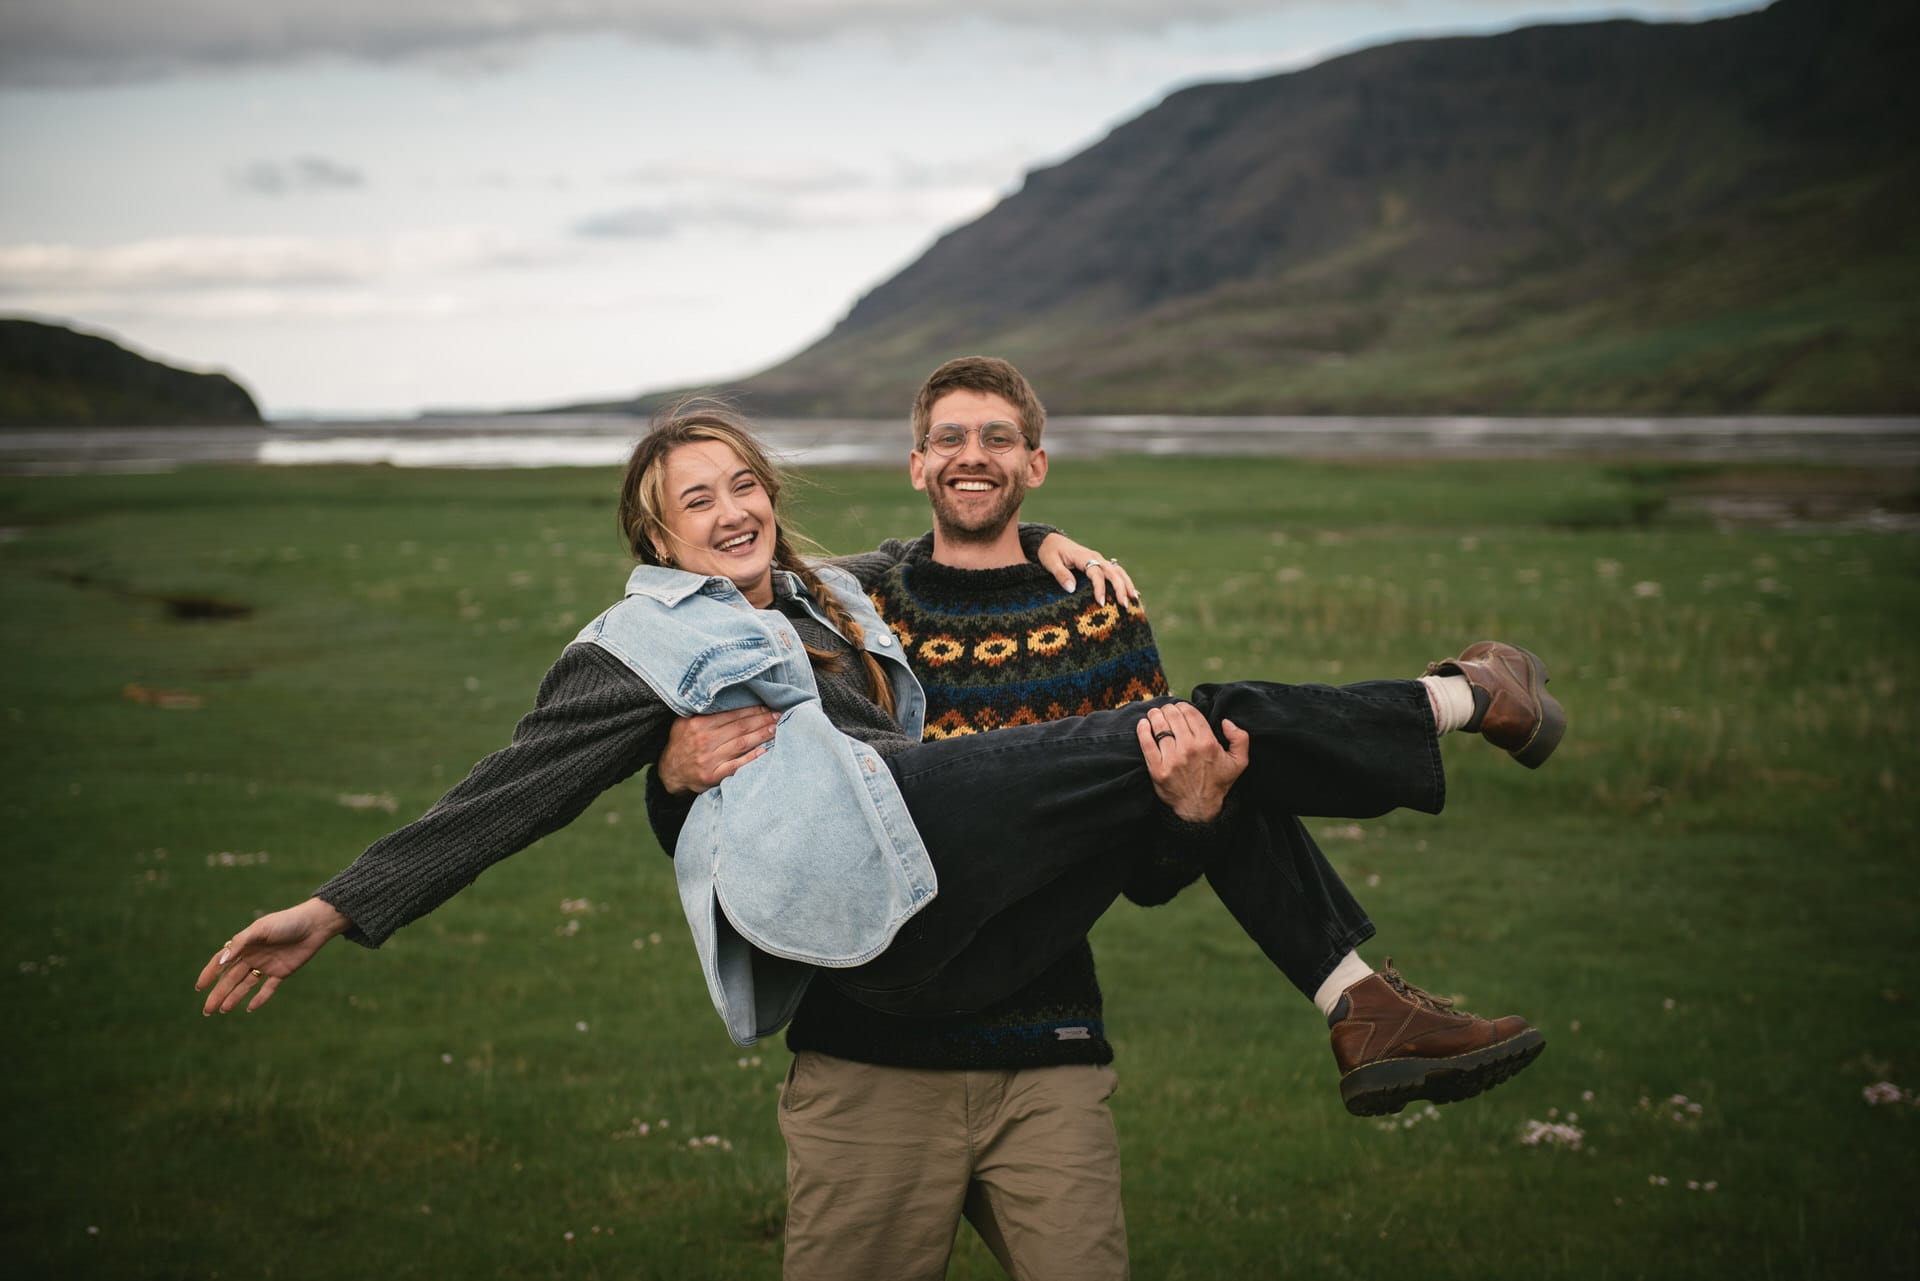 In the heart of the Westfjords, they embrace the spirited playfulness of Icelandic horses, weaving their joy into the fabric of their elopement.